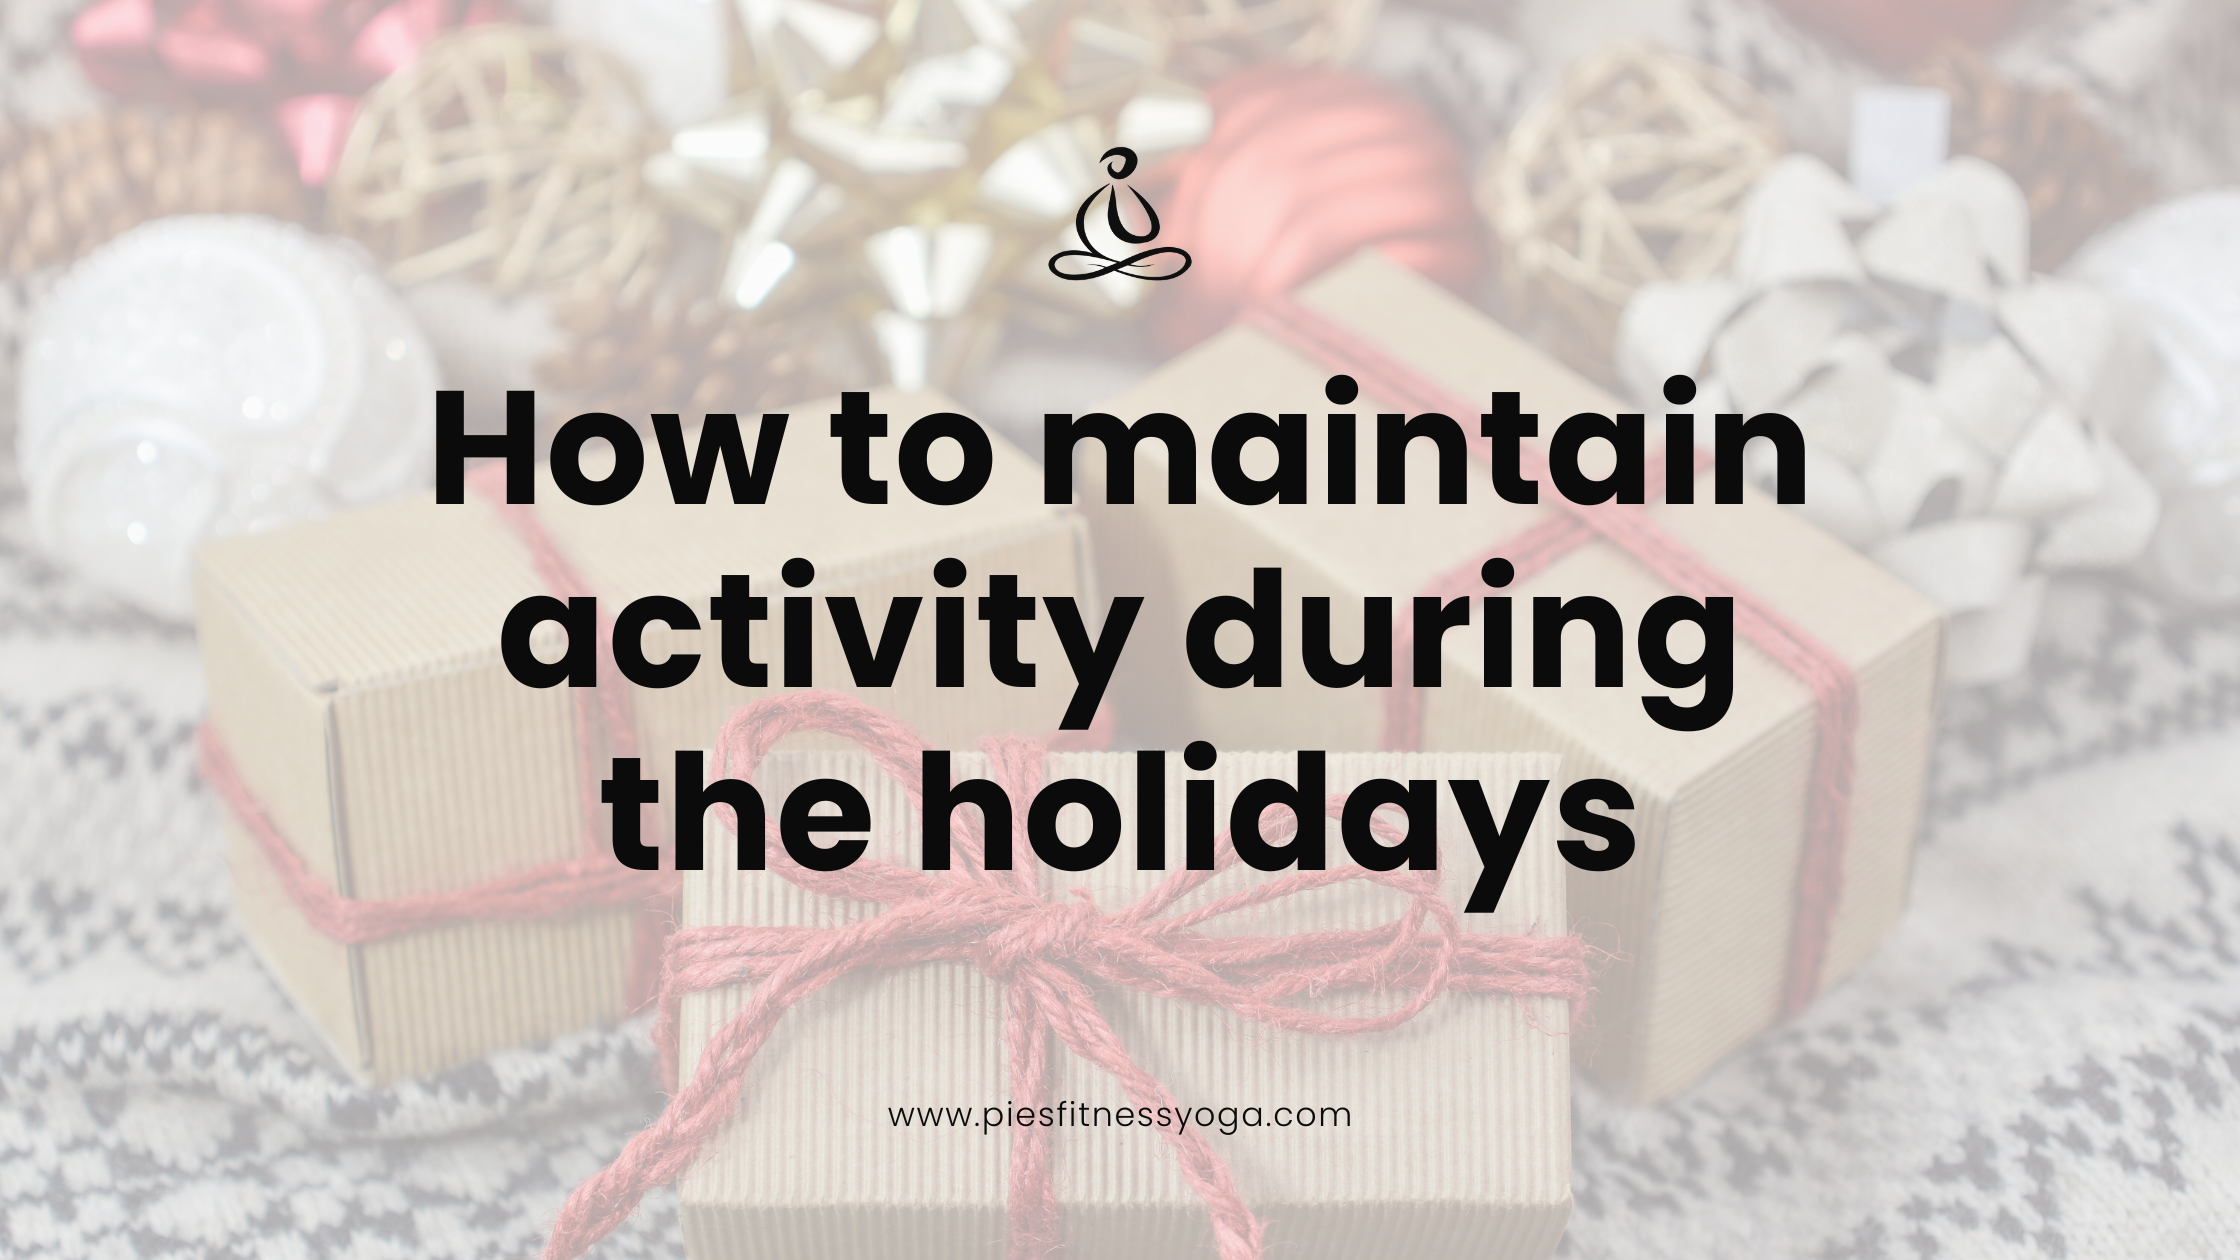 How to Maintain Activity During the Holidays